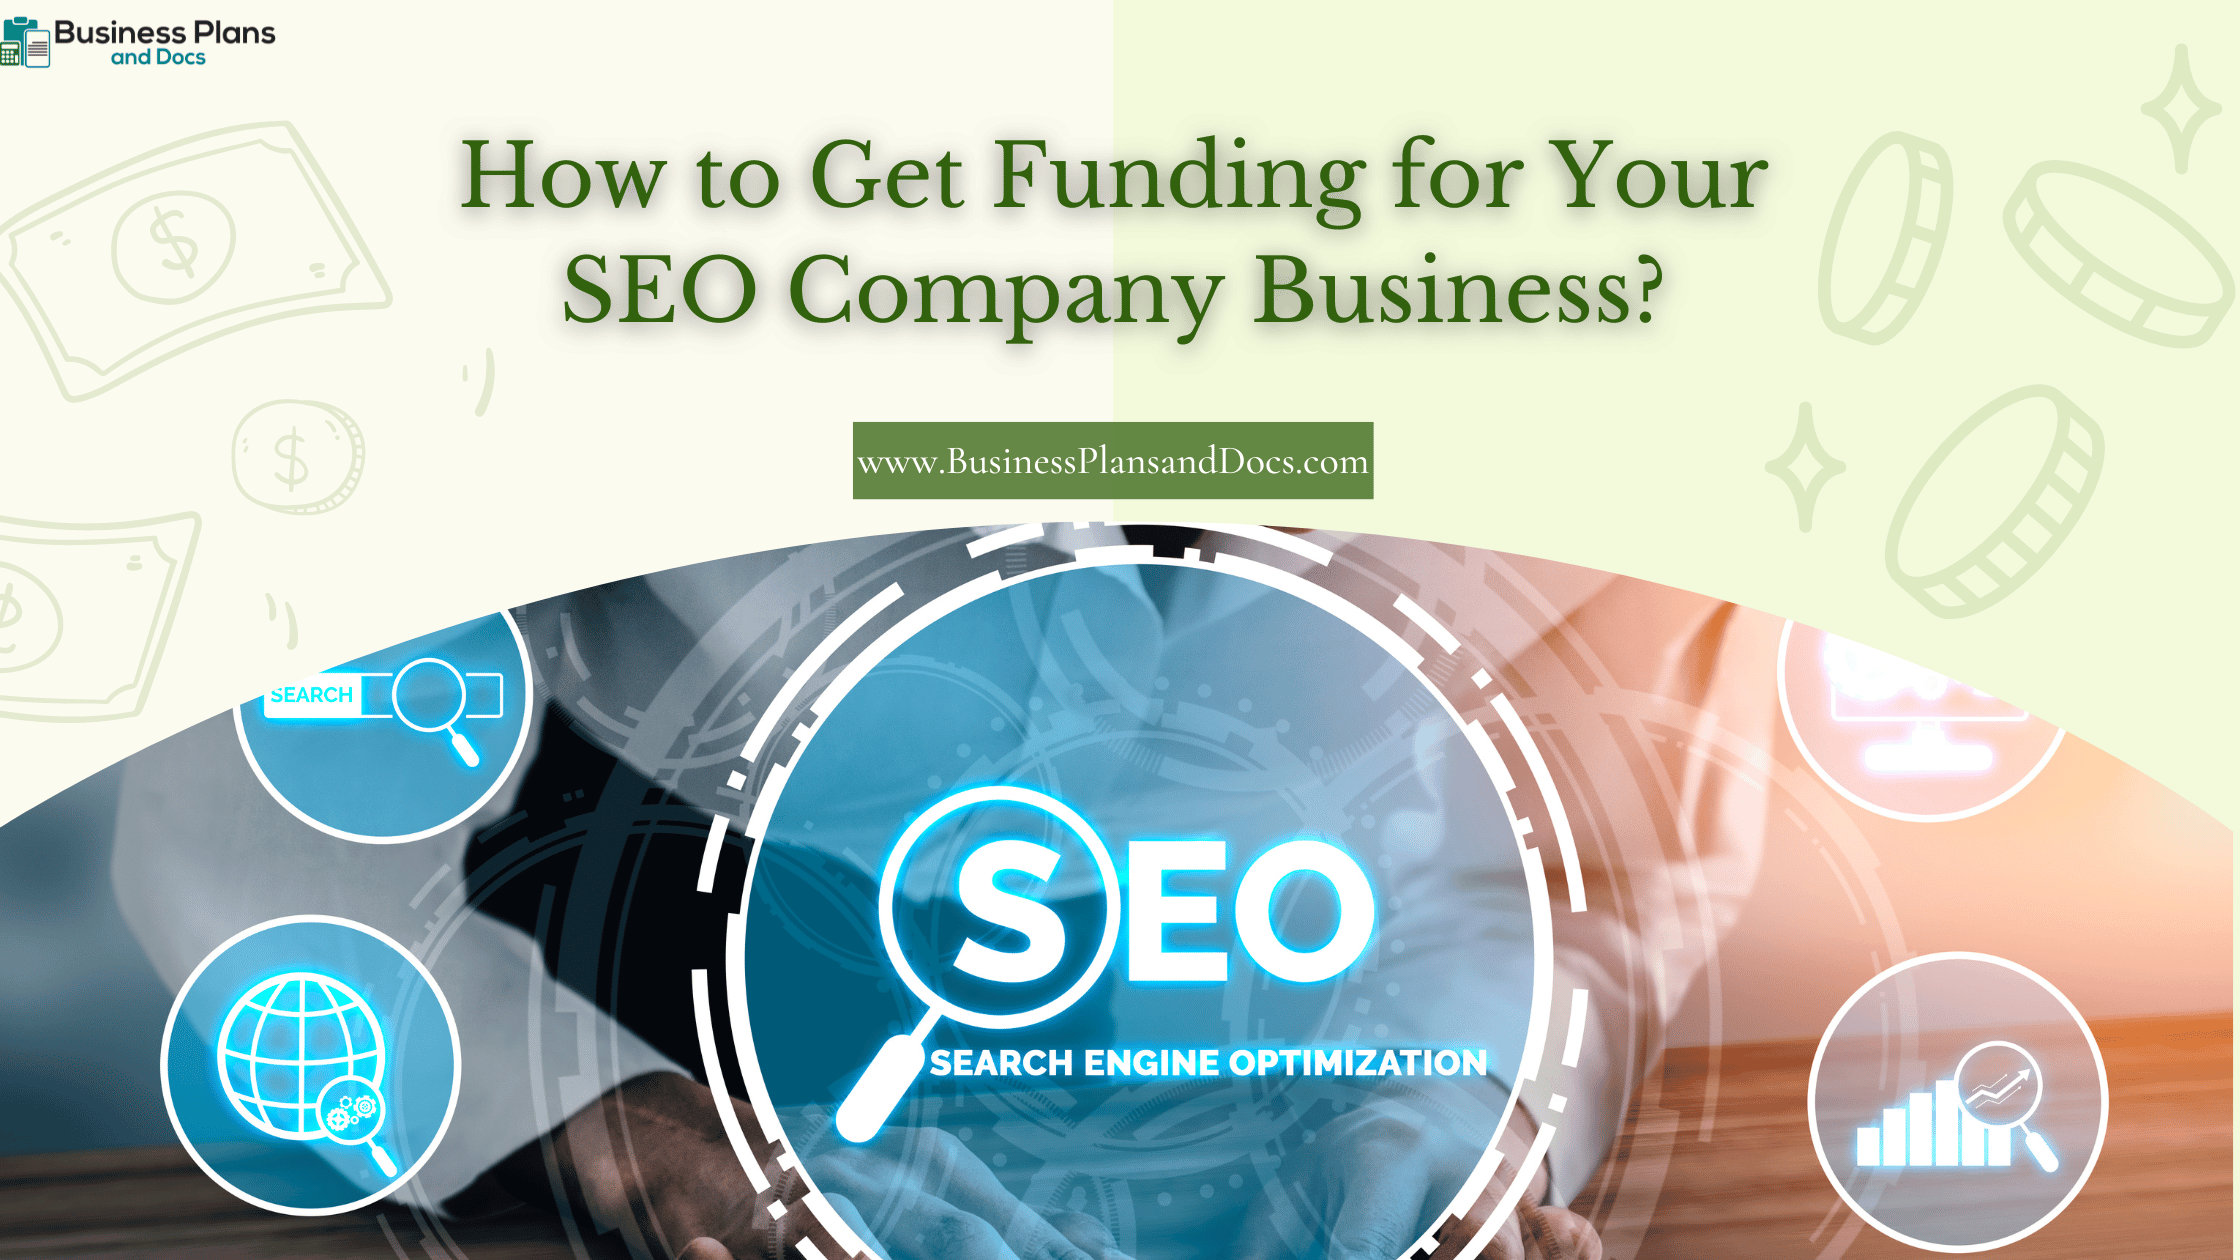 Funding for Your SEO Company Business